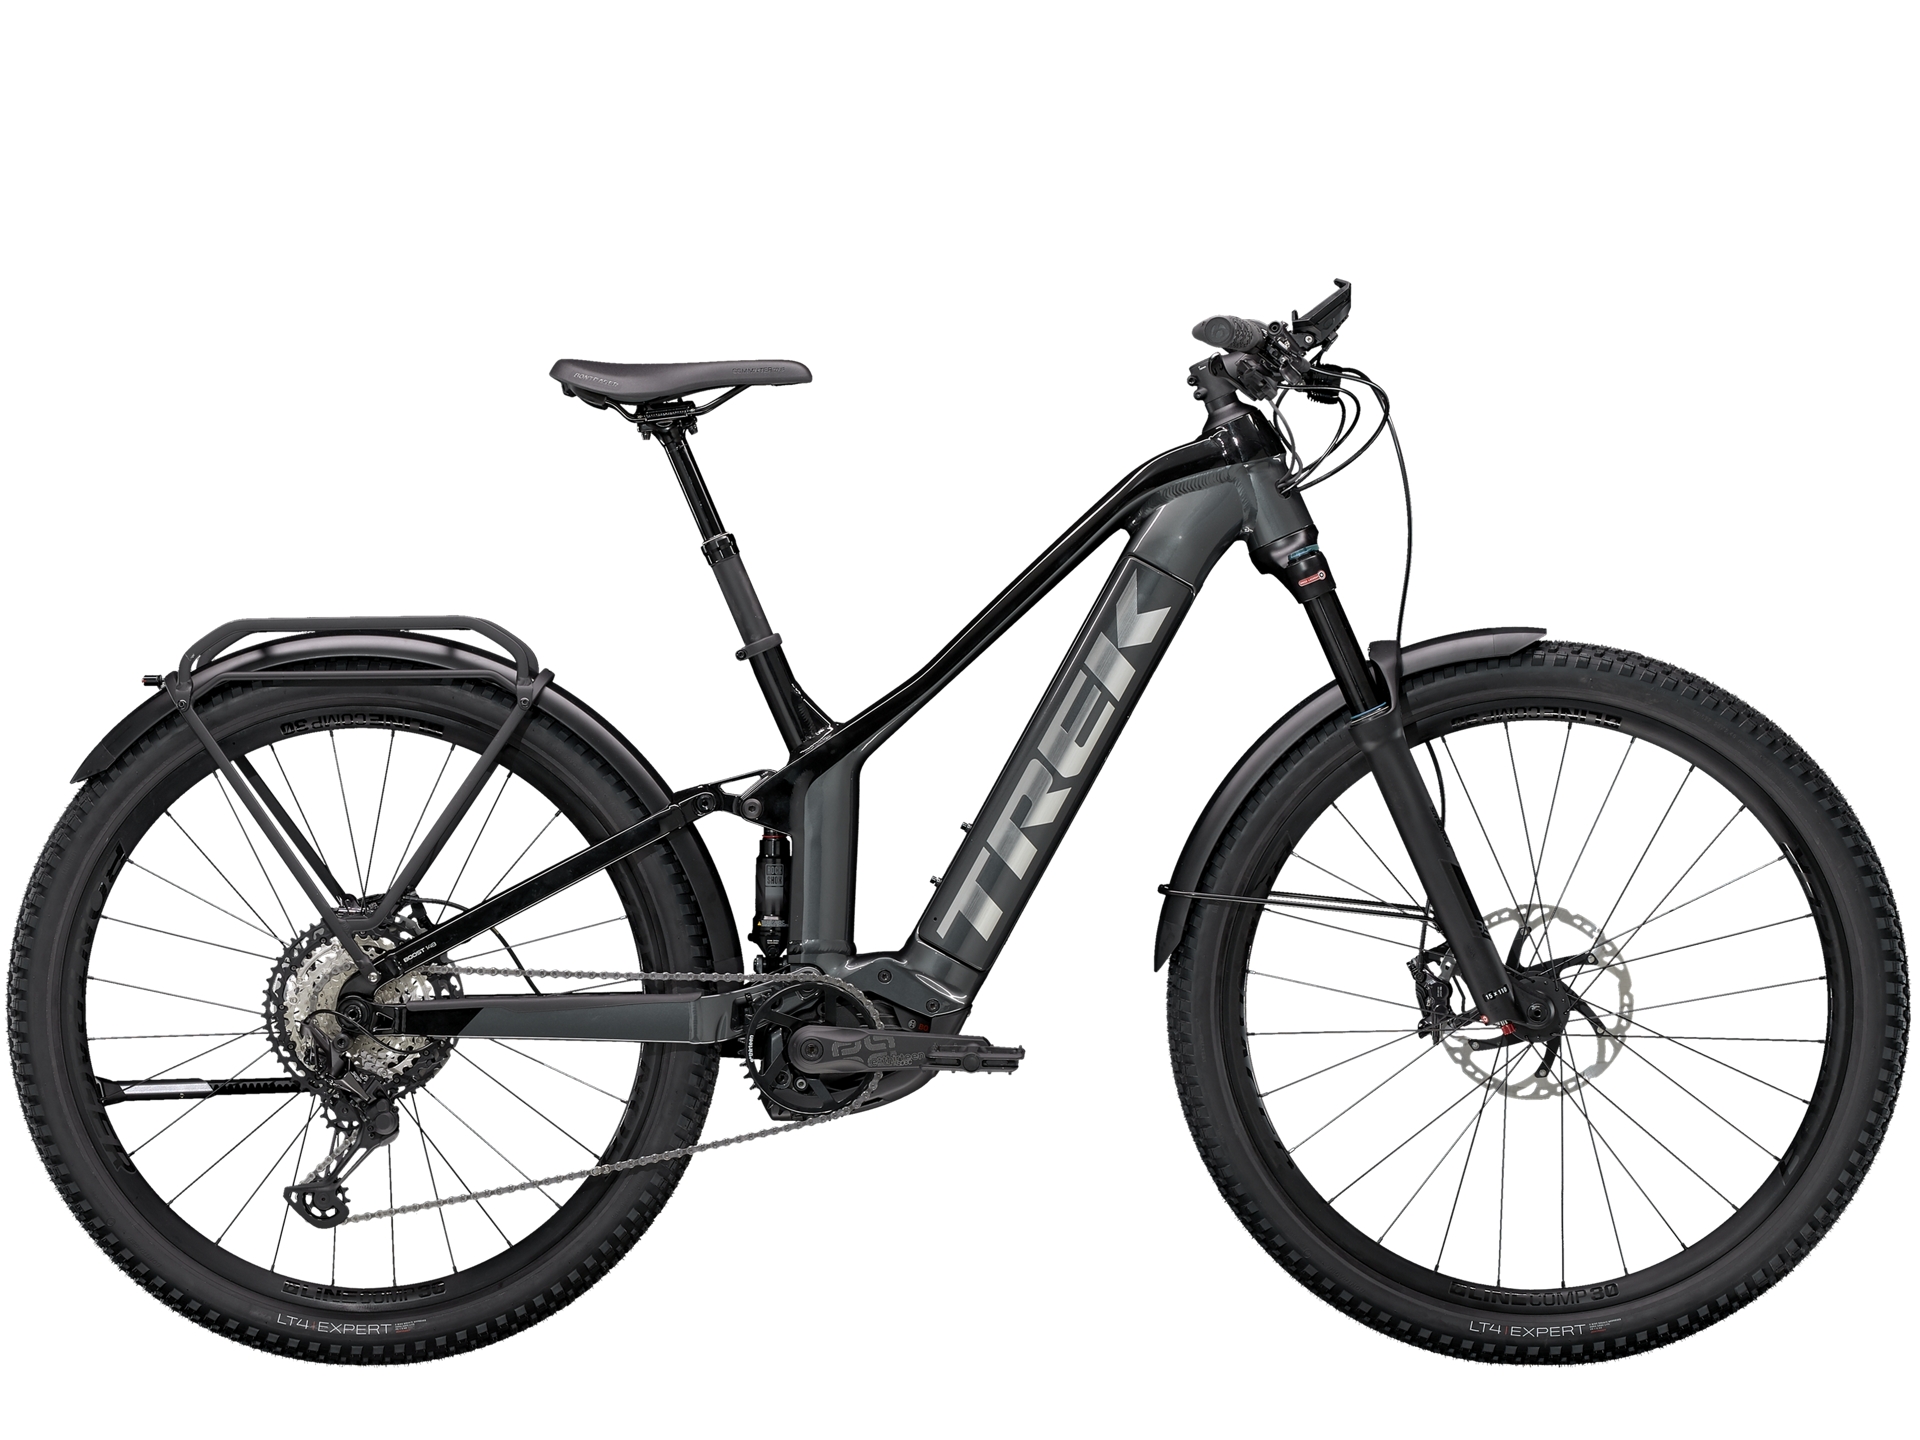 TOP 7 Electric Touring Bikes for LongDistance Travels